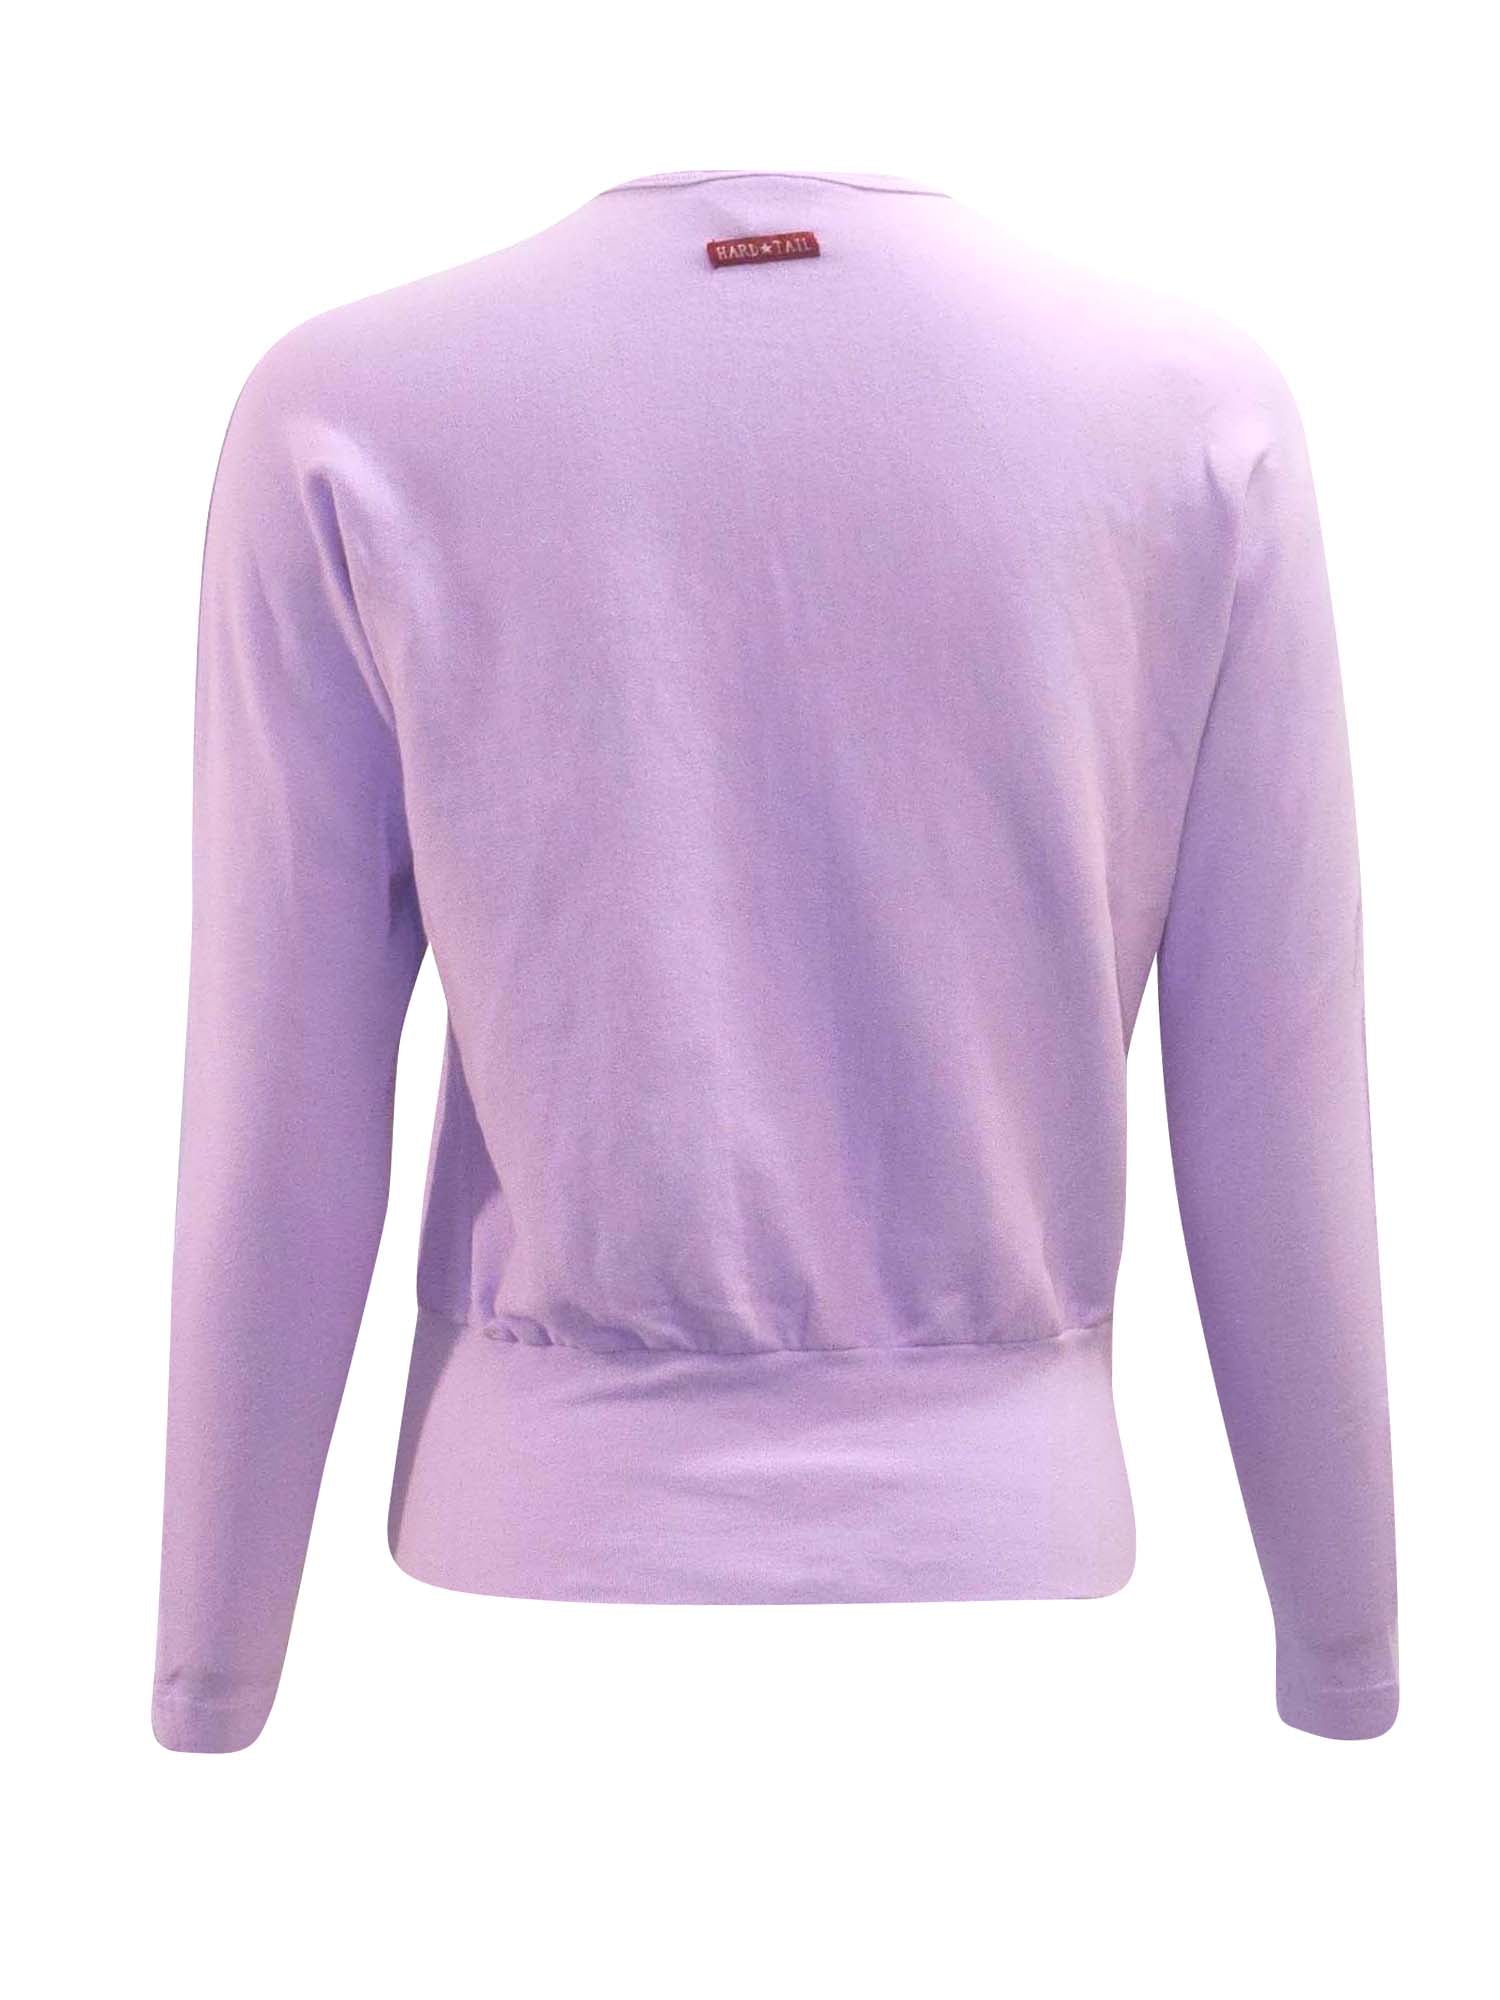 Hardtail Henley Banded Long Sleeve Top (Style T-243) - Tops